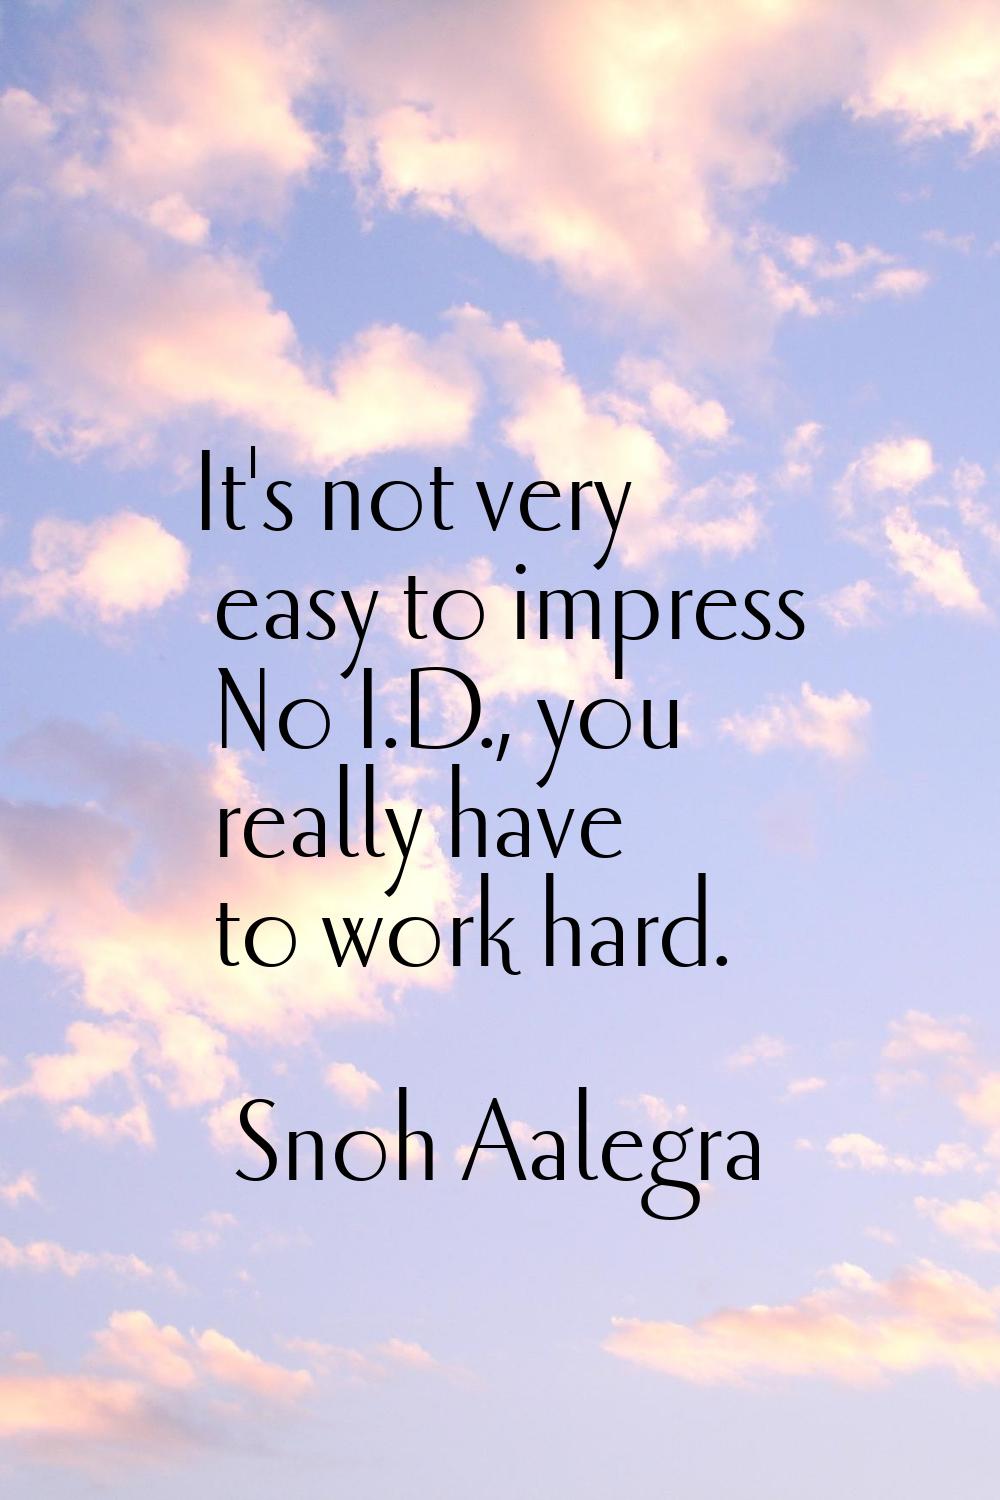 It's not very easy to impress No I.D., you really have to work hard.